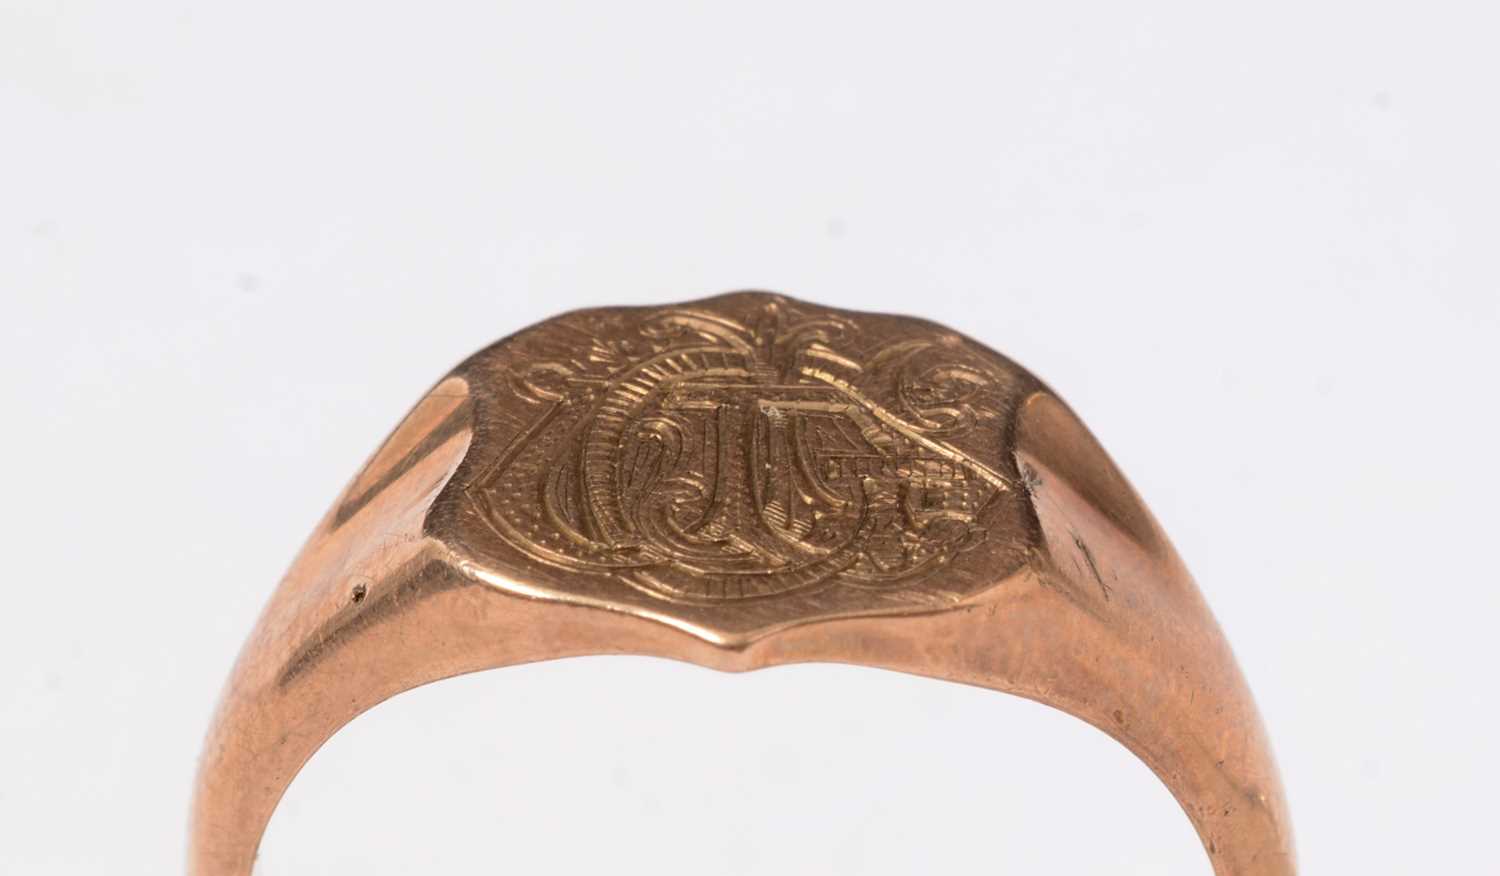 Lot 271 - A 9ct rose gold signet ring, the shield-shaped face engraved with a monogram.